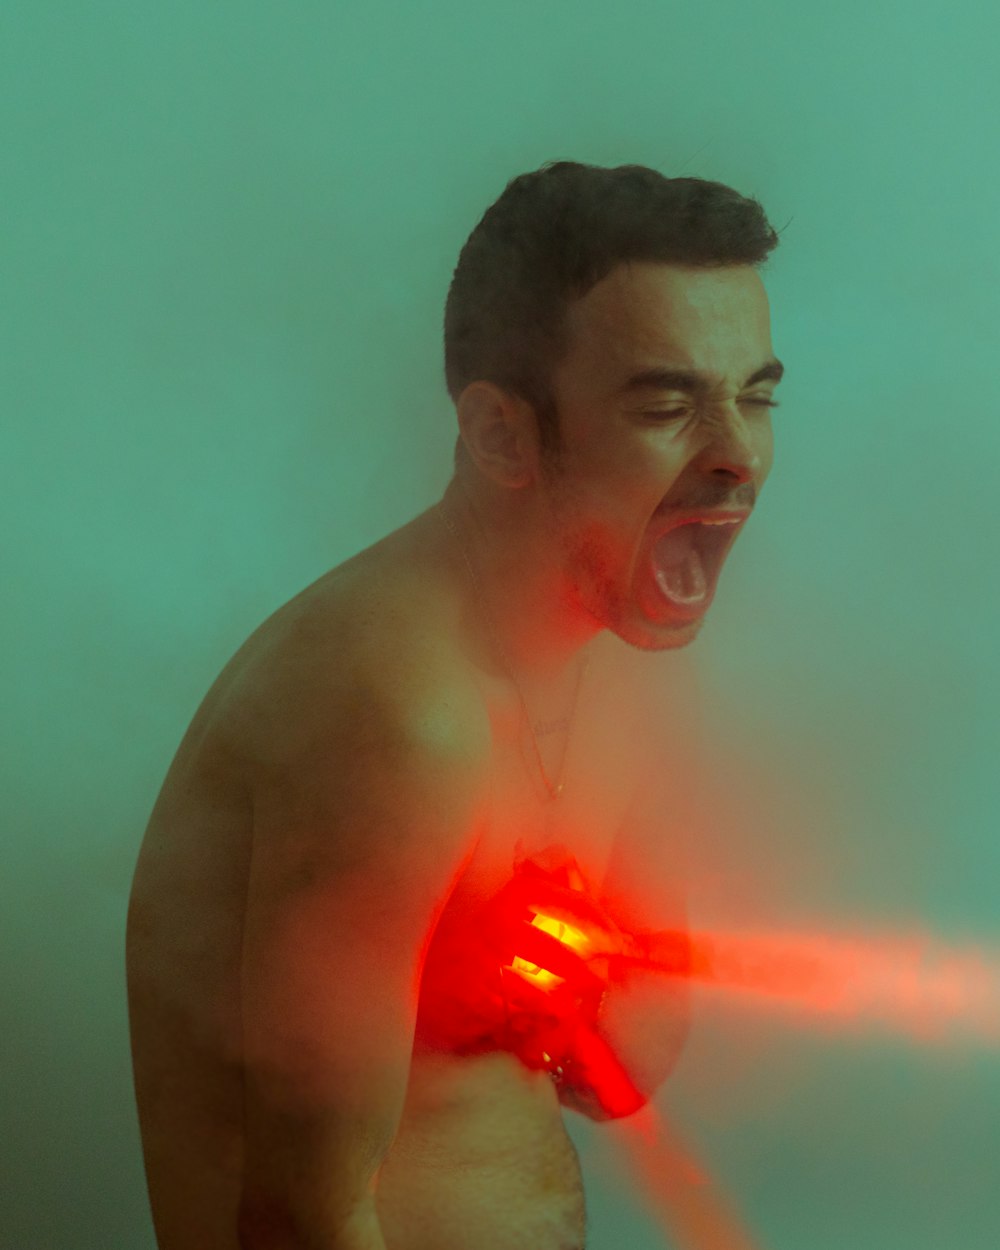 a shirtless man with a laser gun in his hand